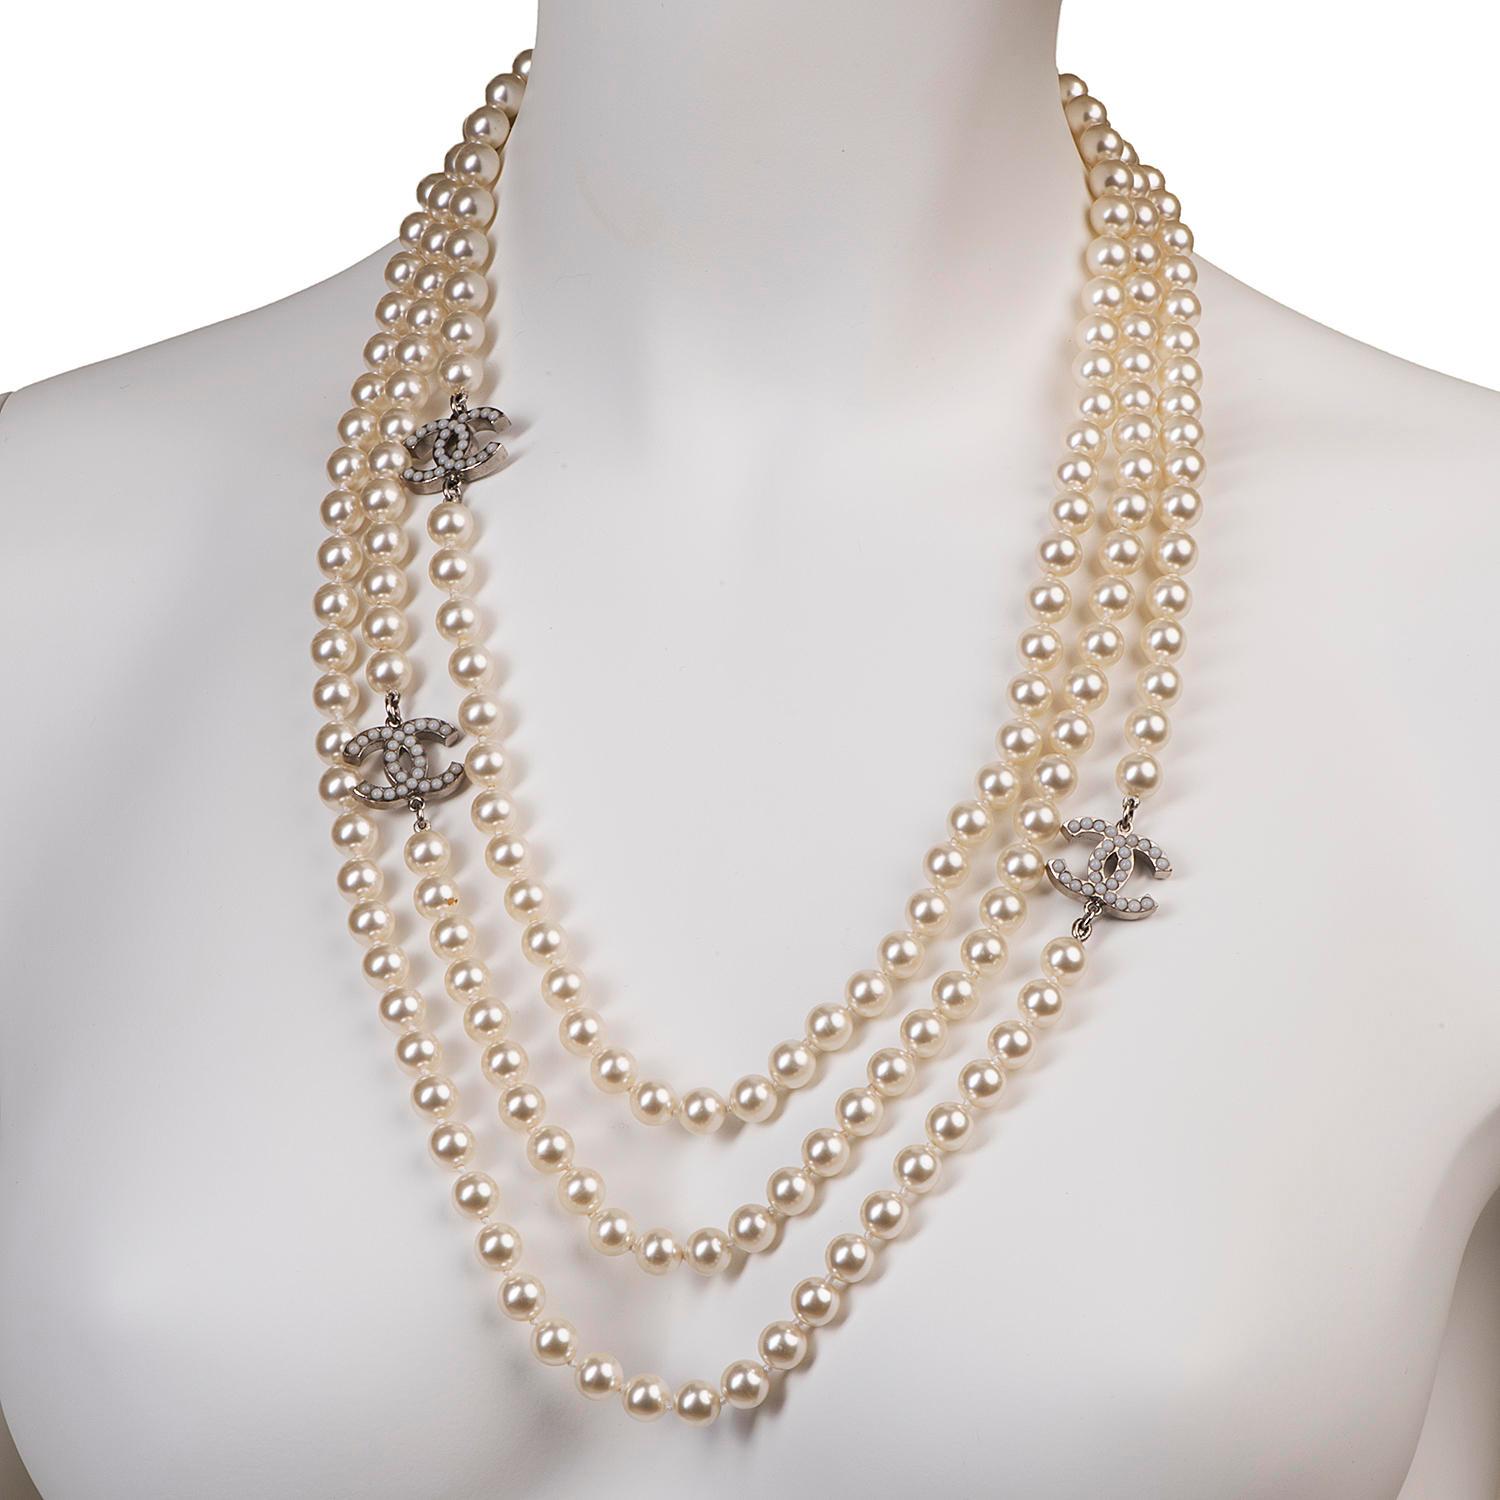 Women's Stunning Chanel 3-String Pearl & Inset 'C' Logo Necklace